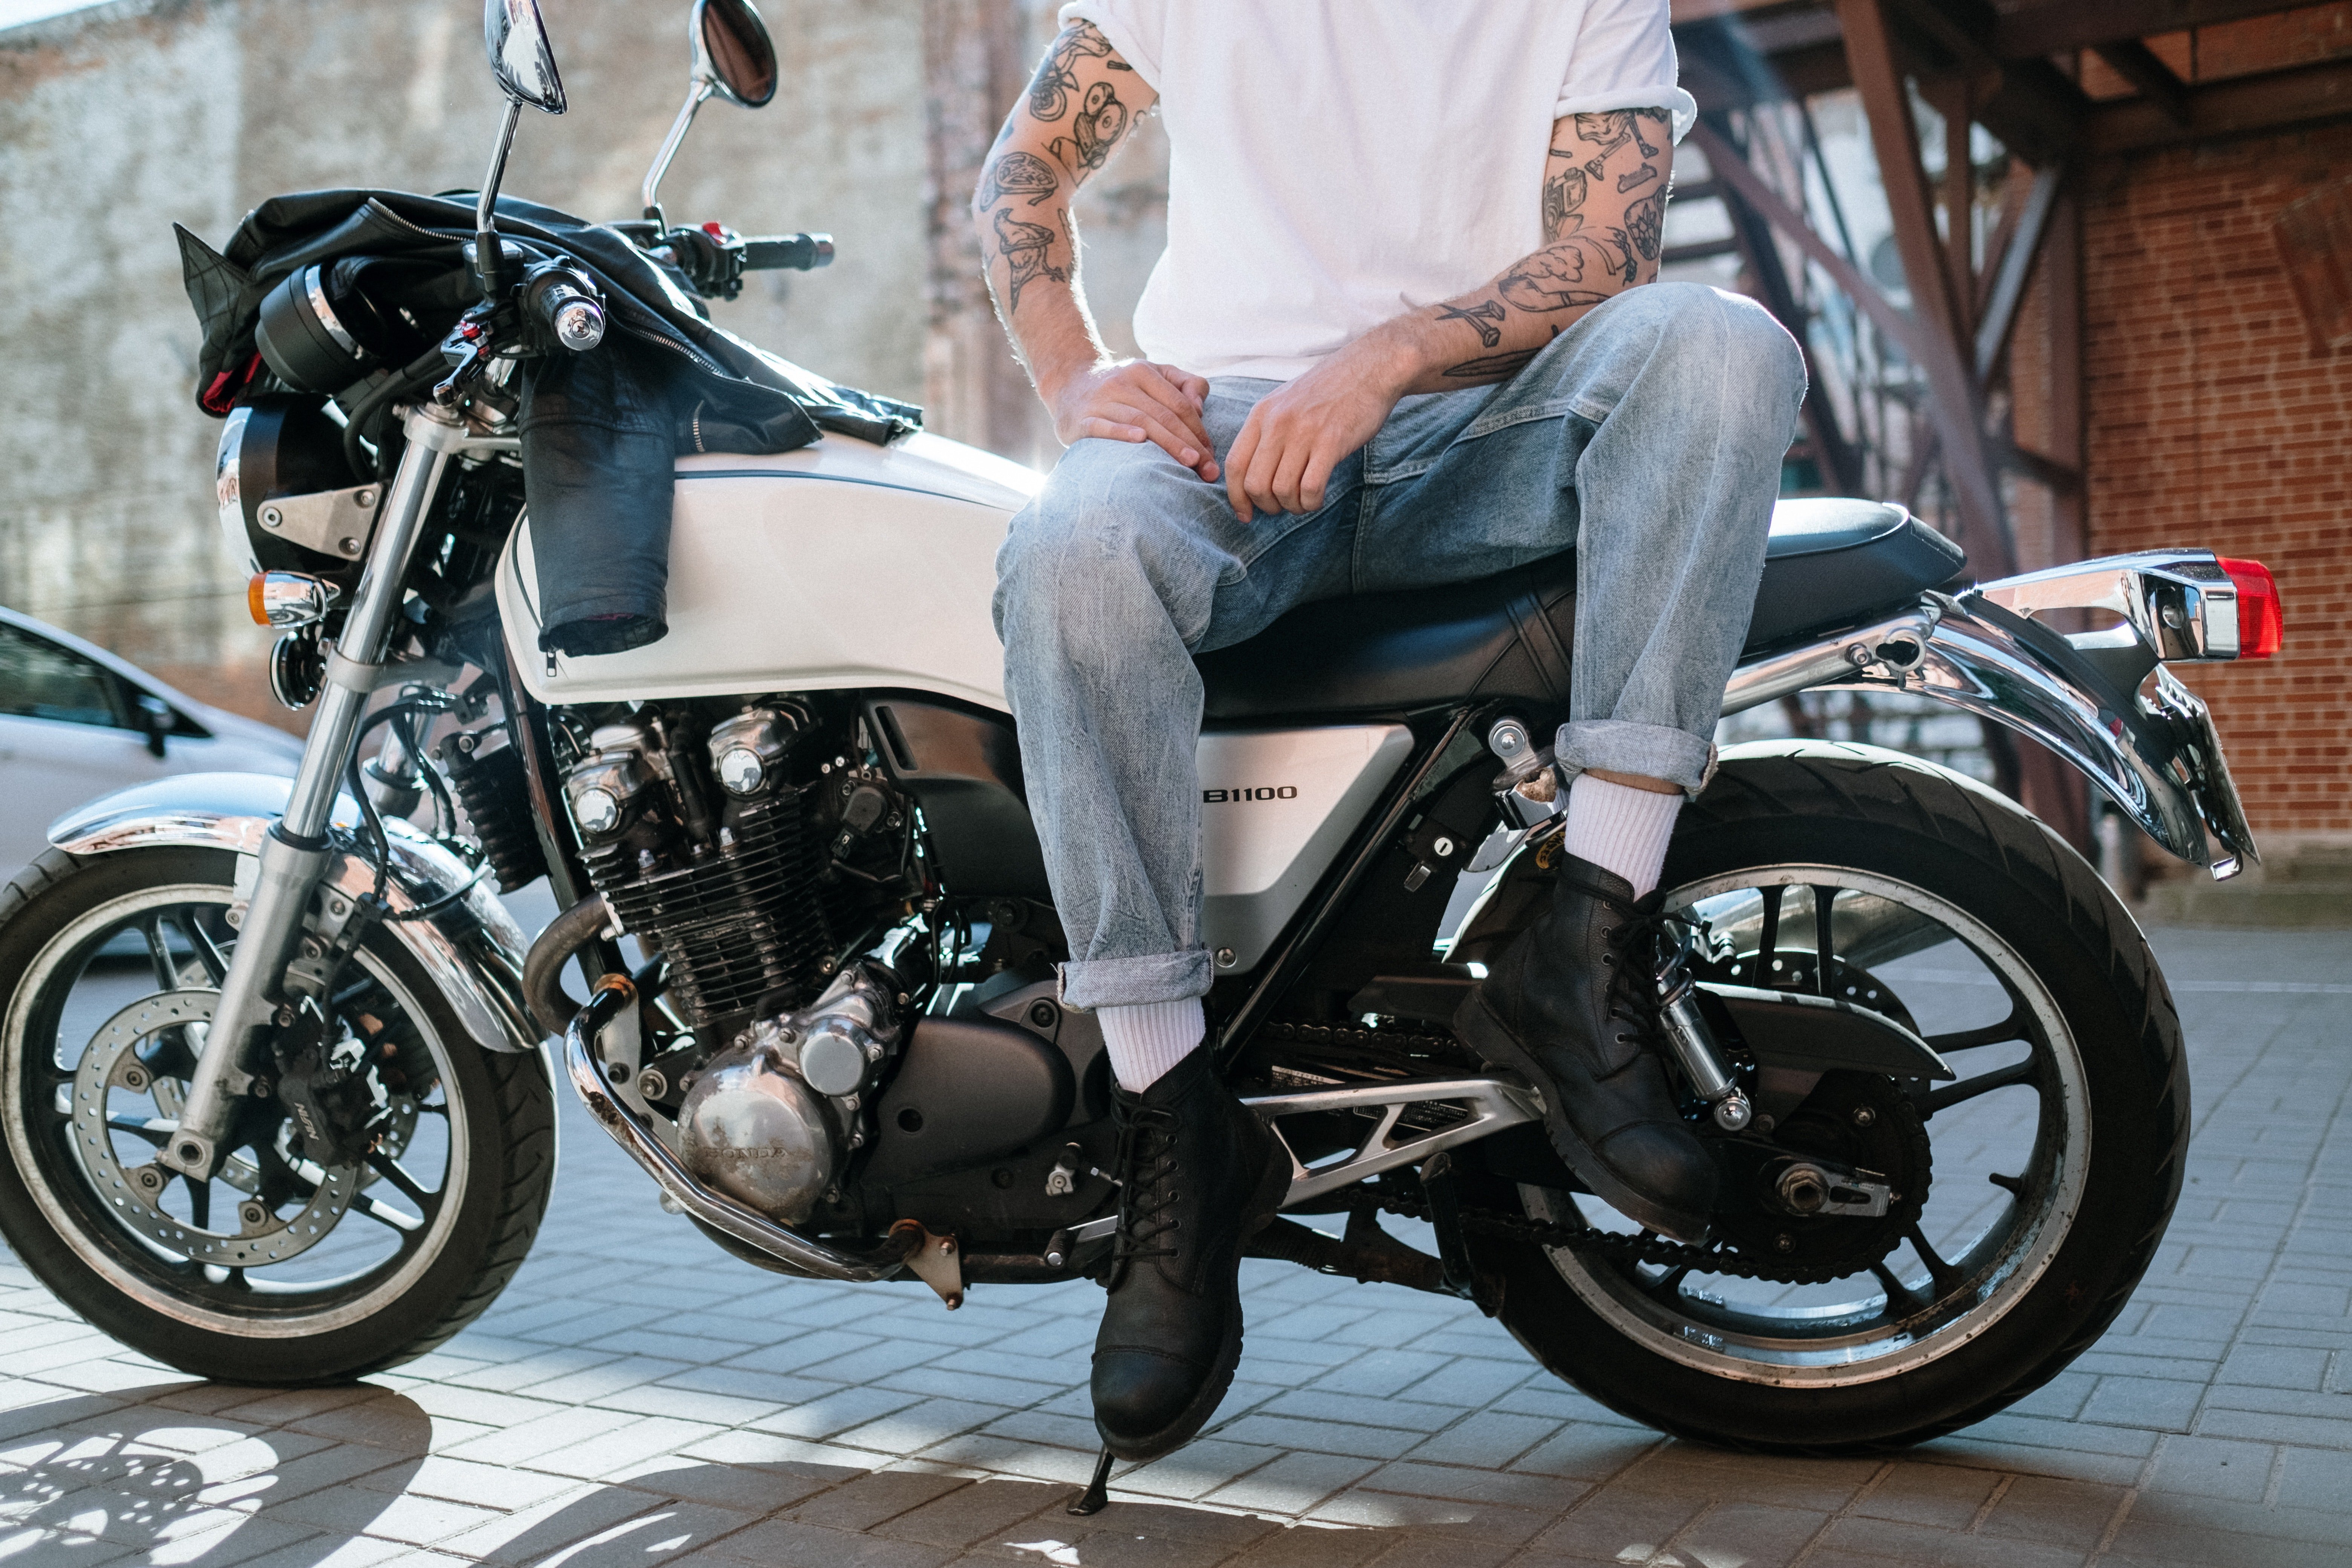 A man with tattoos sitting on a motobike. | Pexels/ cottonbro